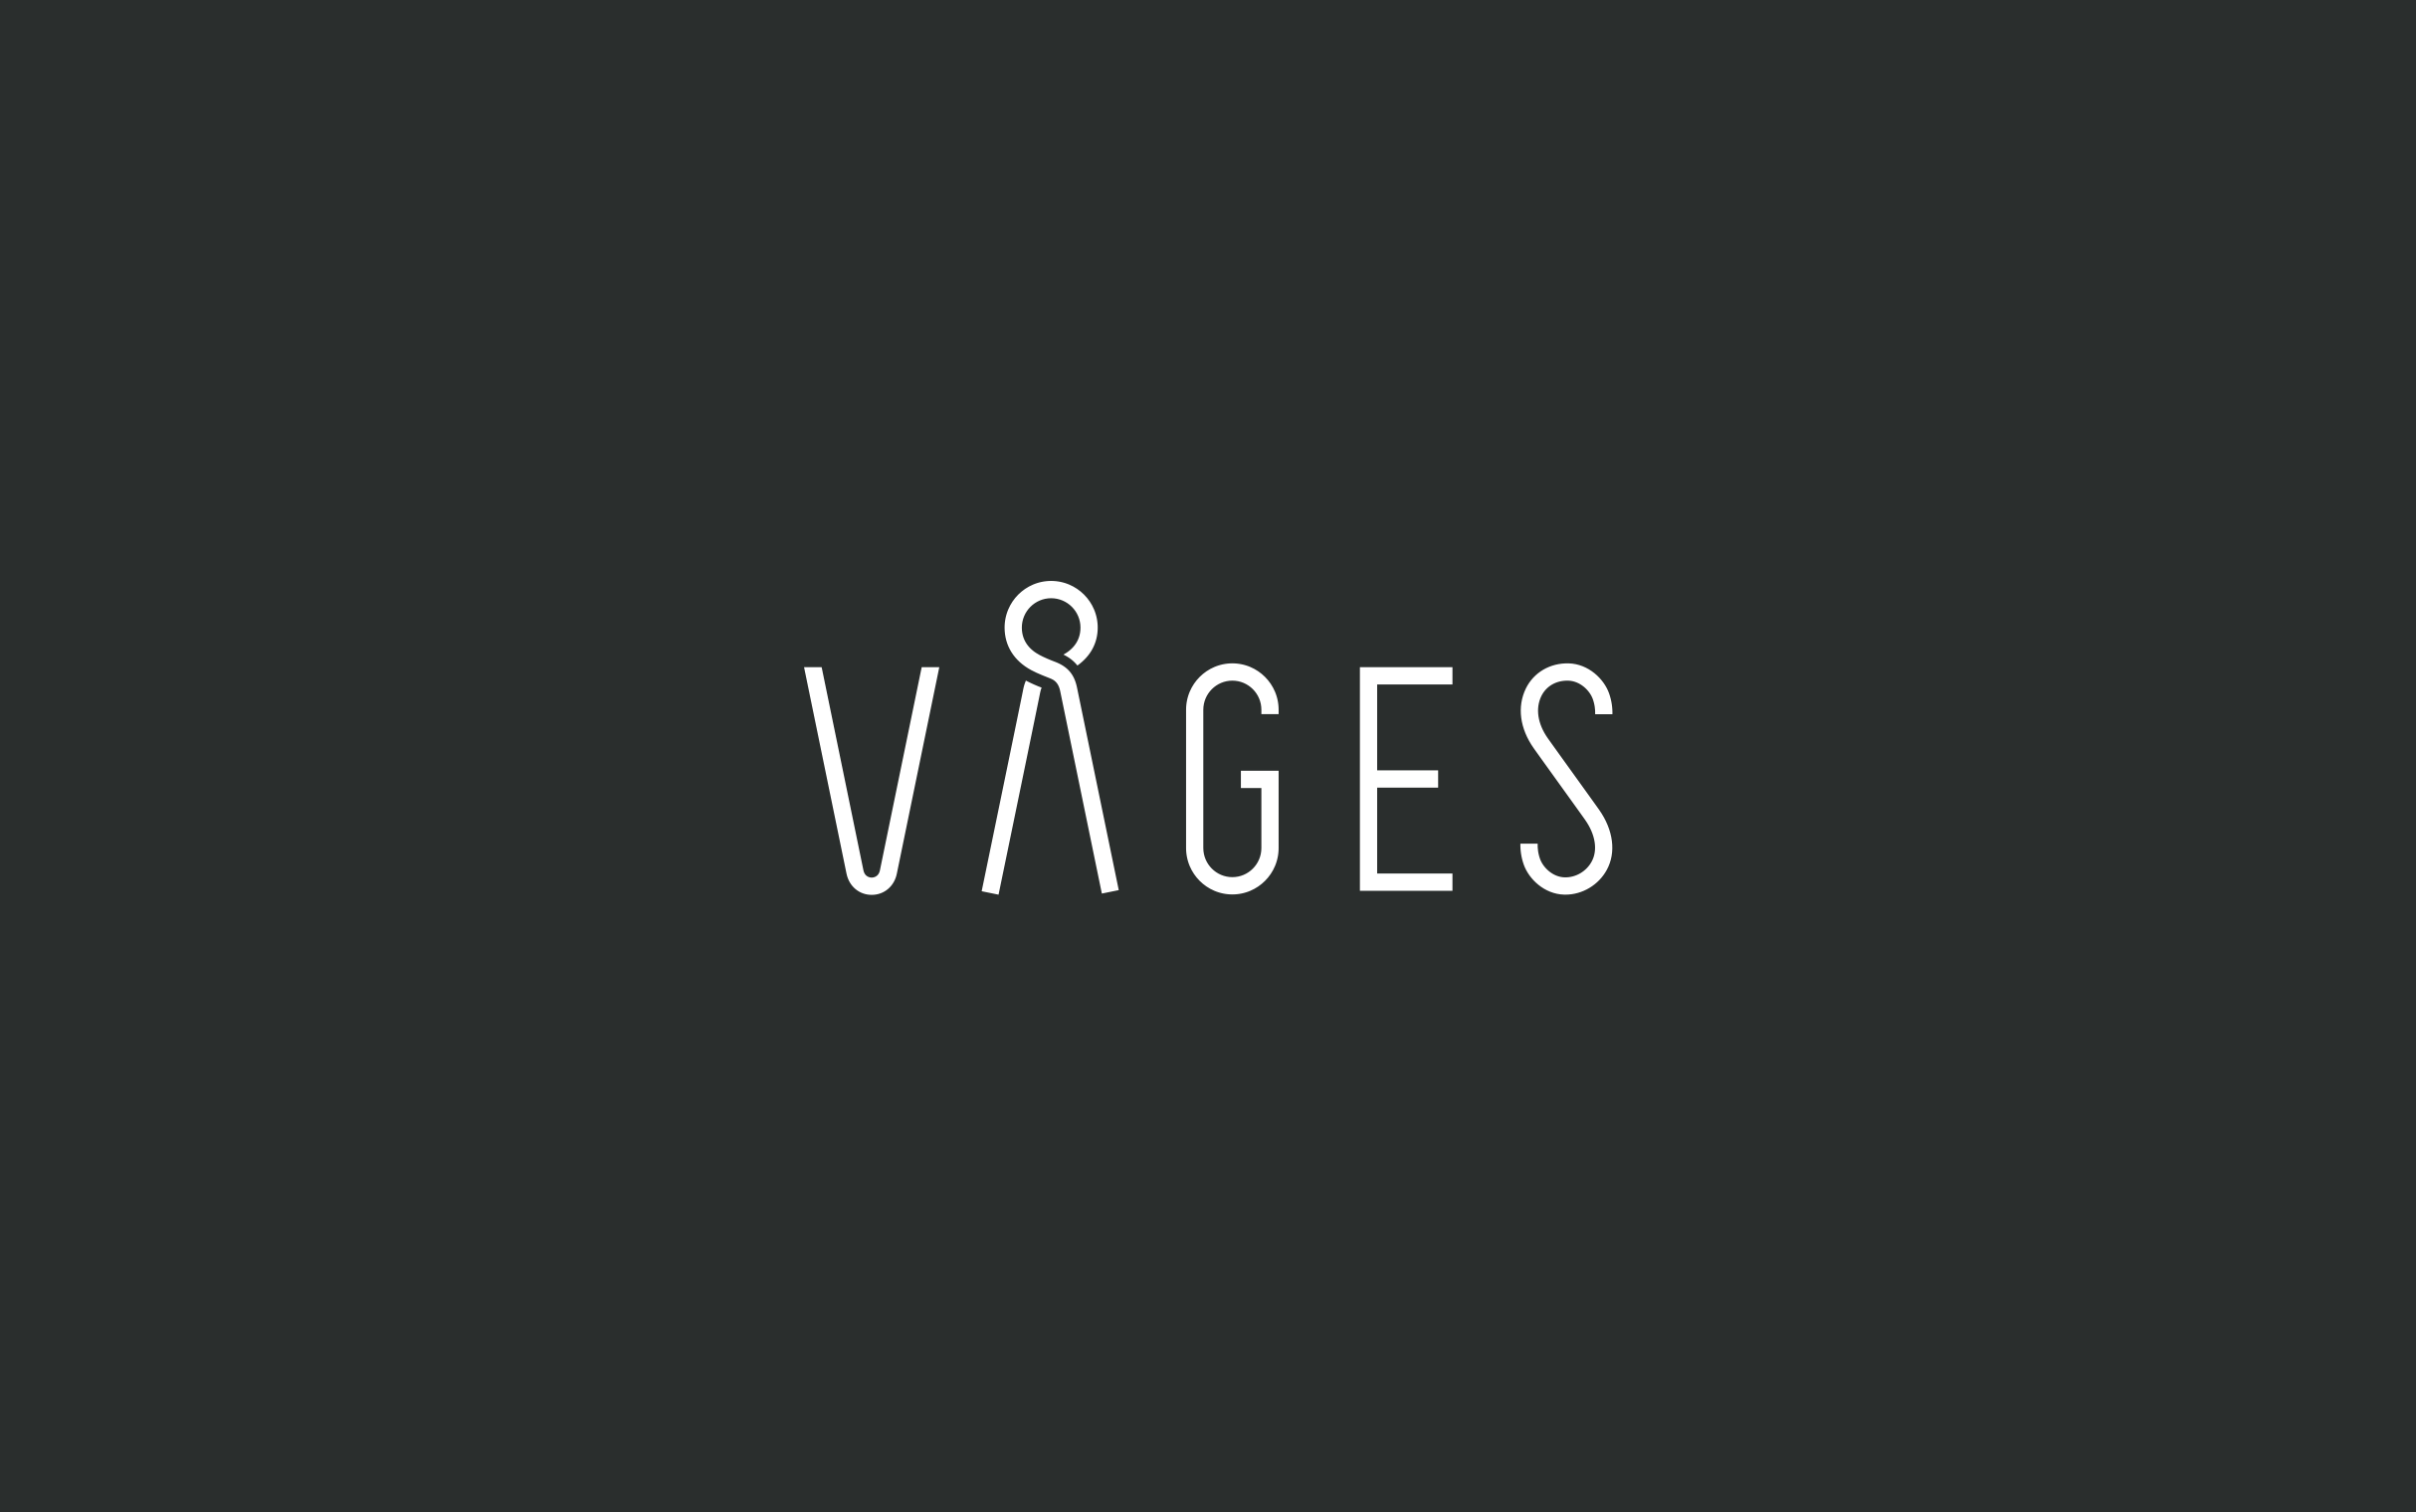 Brand Design and E-commerce website for Våges. Material from the process. The Våges logotype in white on black background.